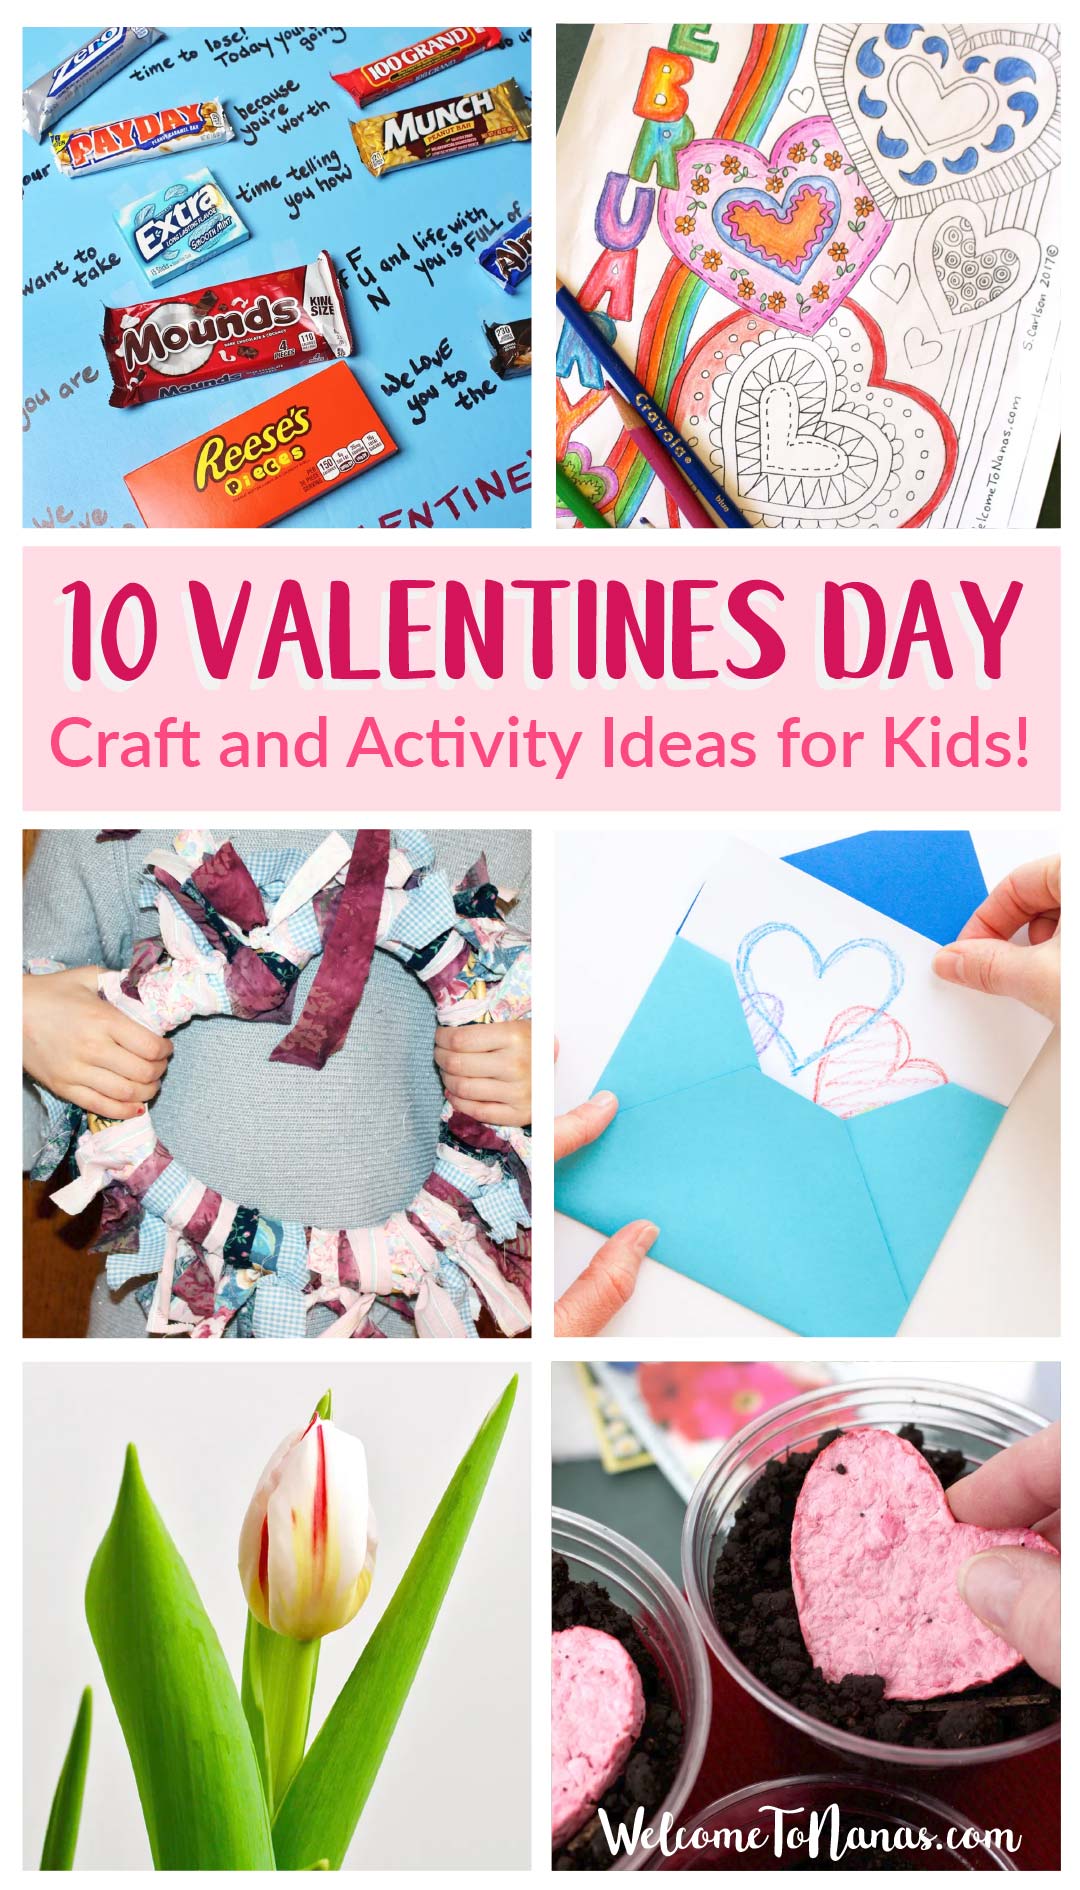 10 easy Valentine's Day crafts for kids to make